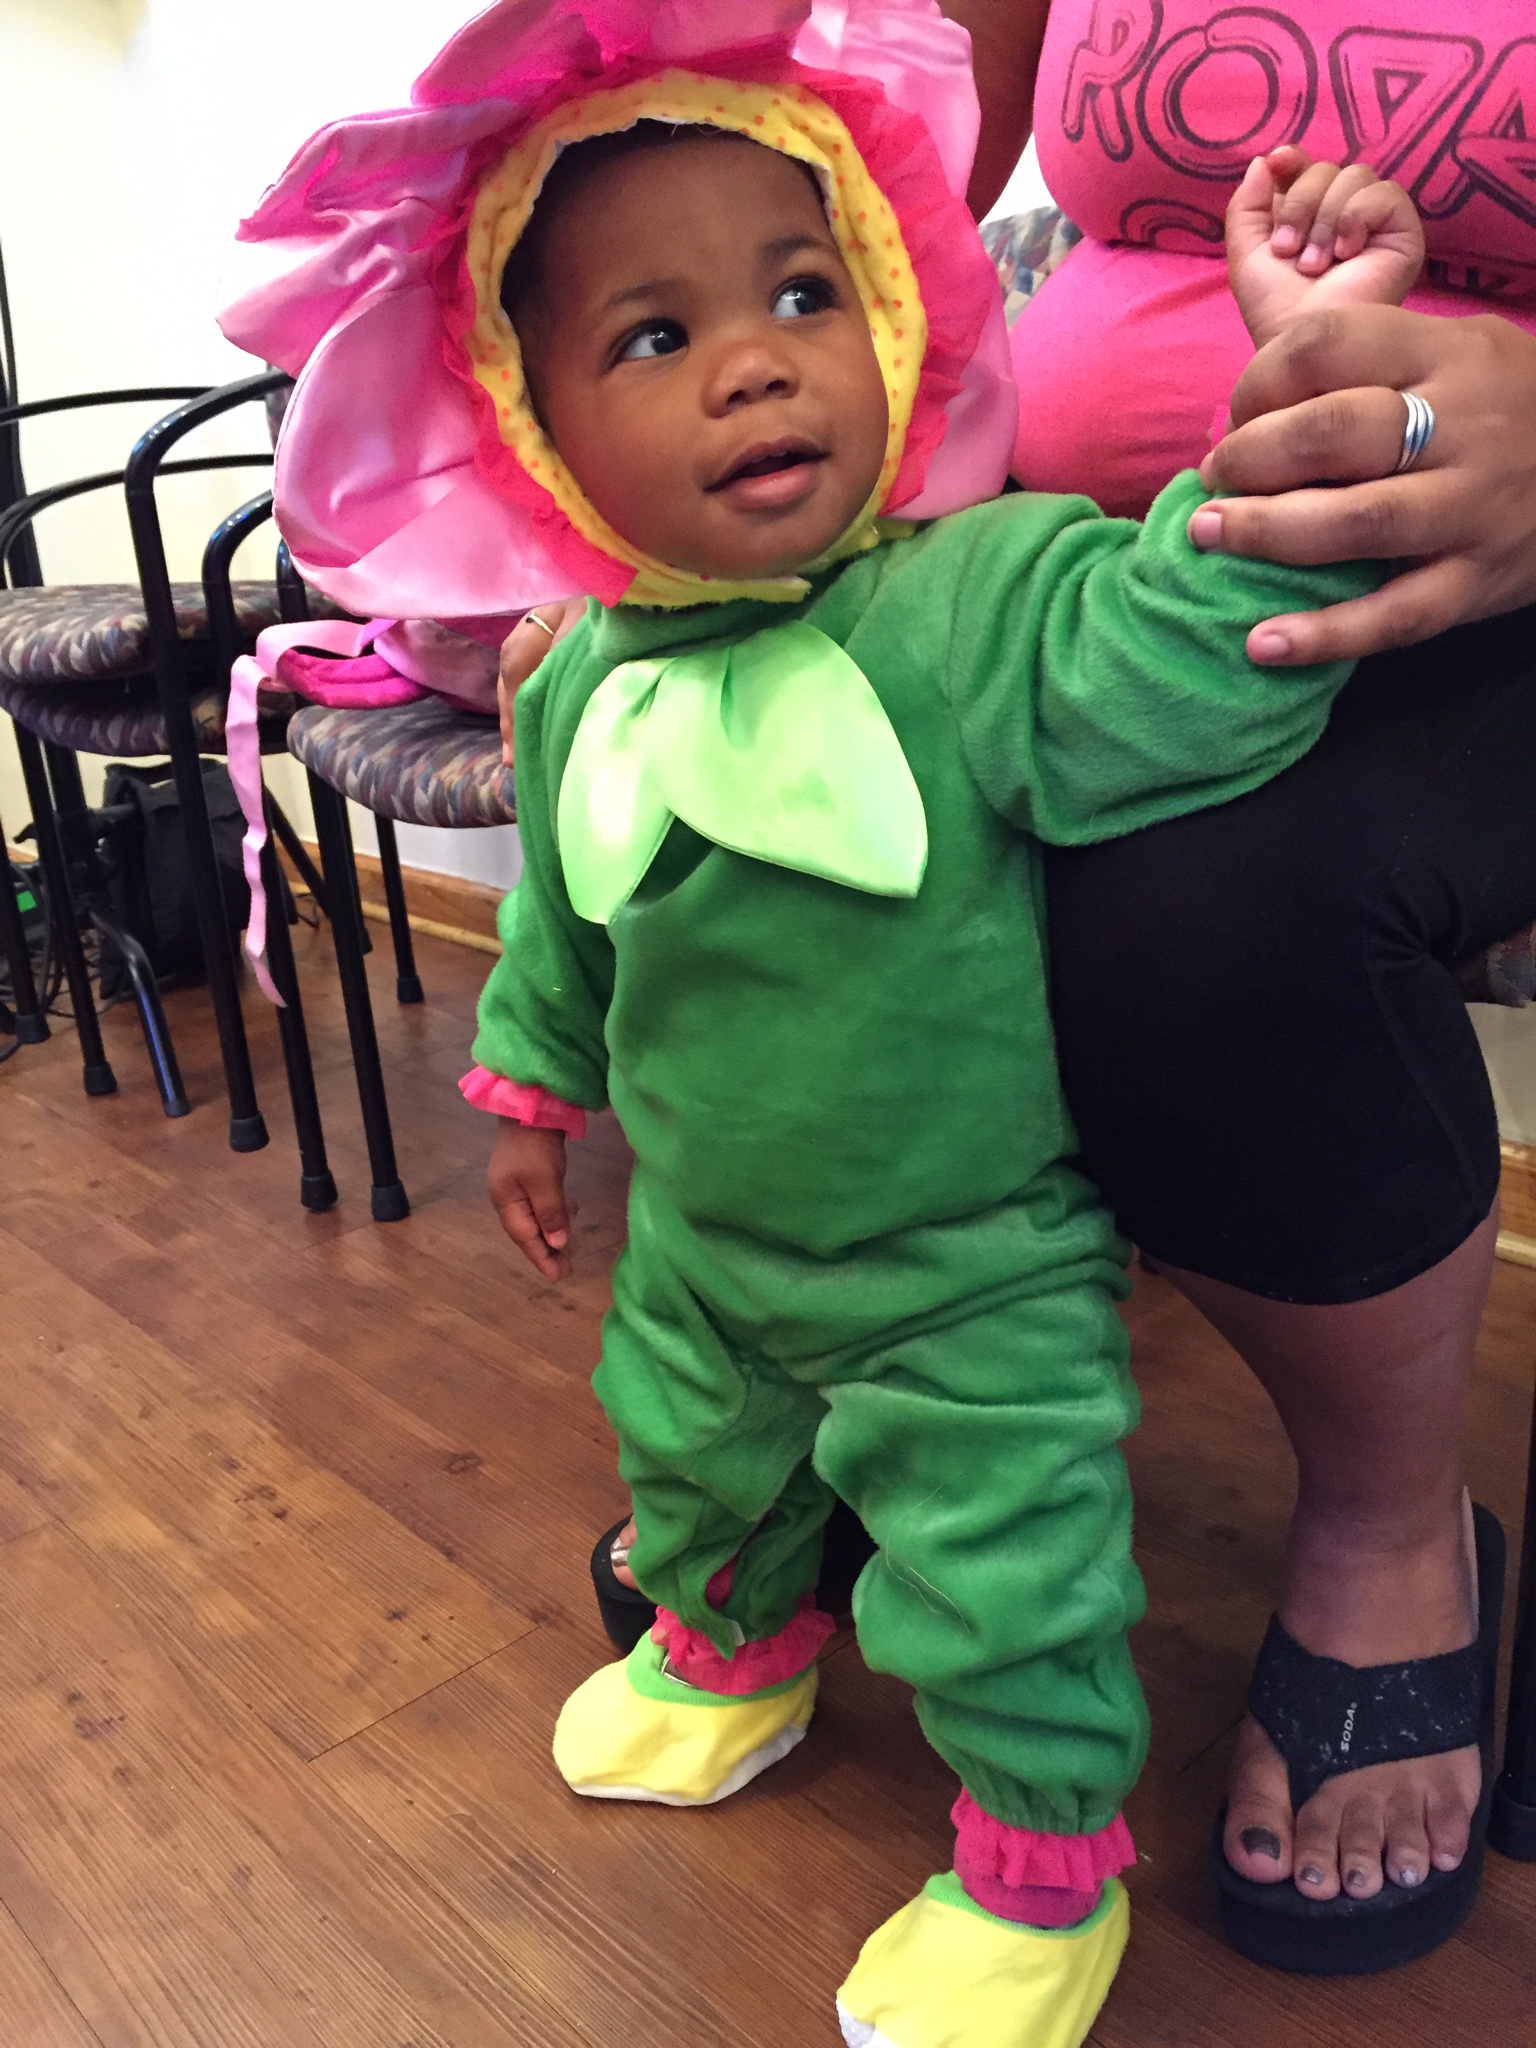  an adorable 'WEENSTER at Covenant House New Orleans on October 21, 2015 